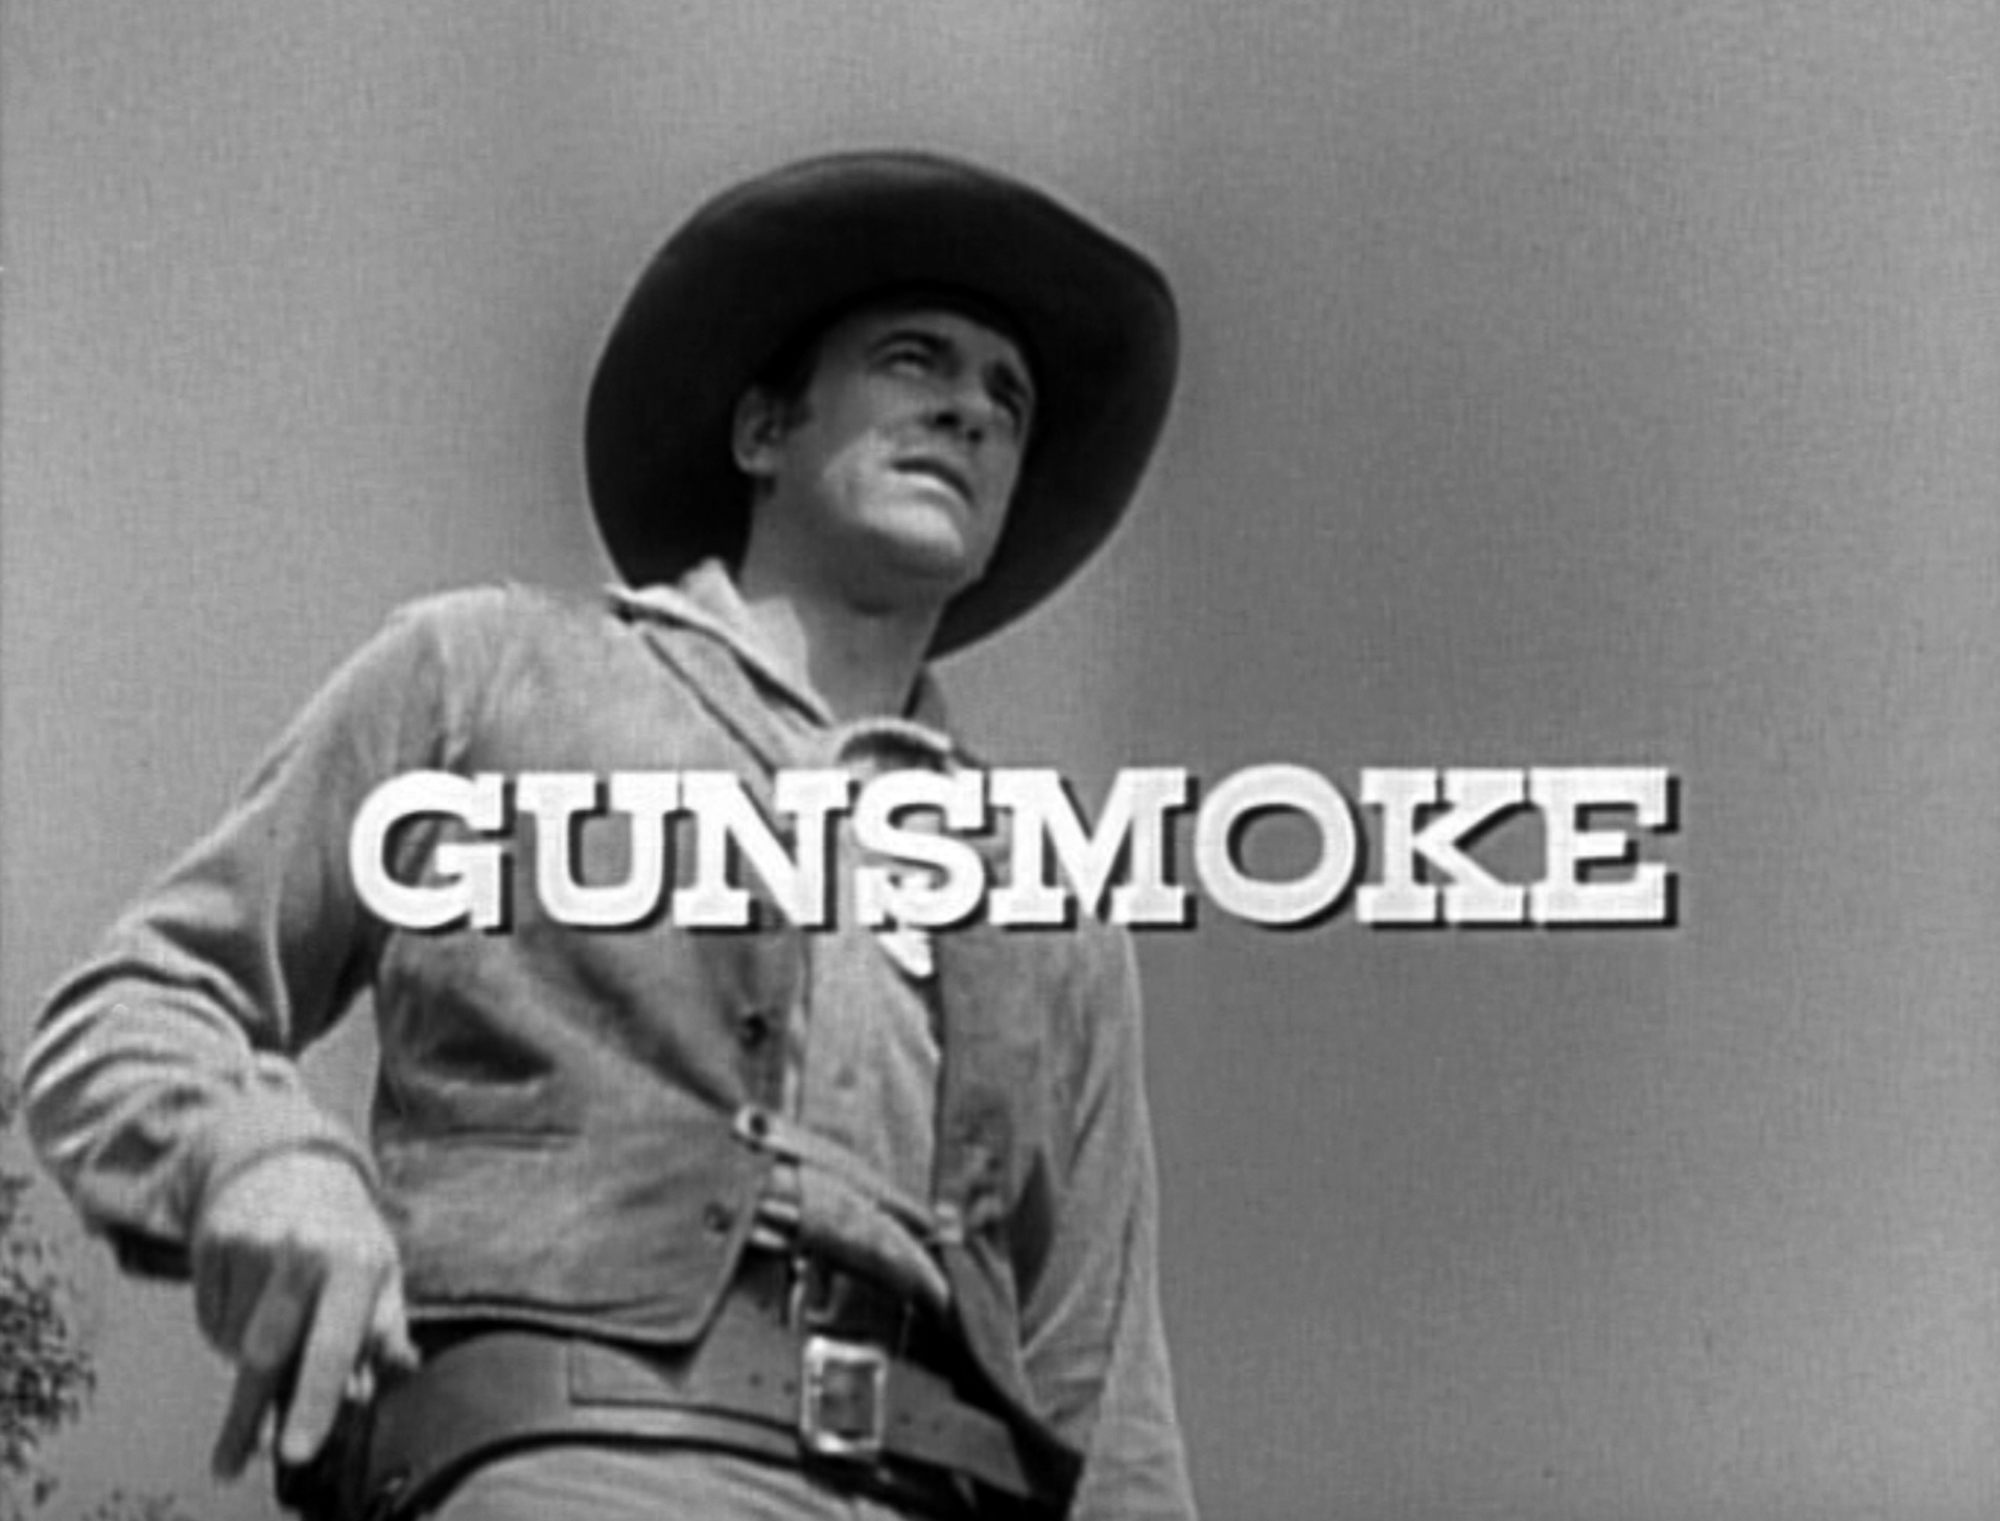 'Gunsmoke' James Arness as Matt Dillon with his hand on his pistol on his belt with the title card over the image.